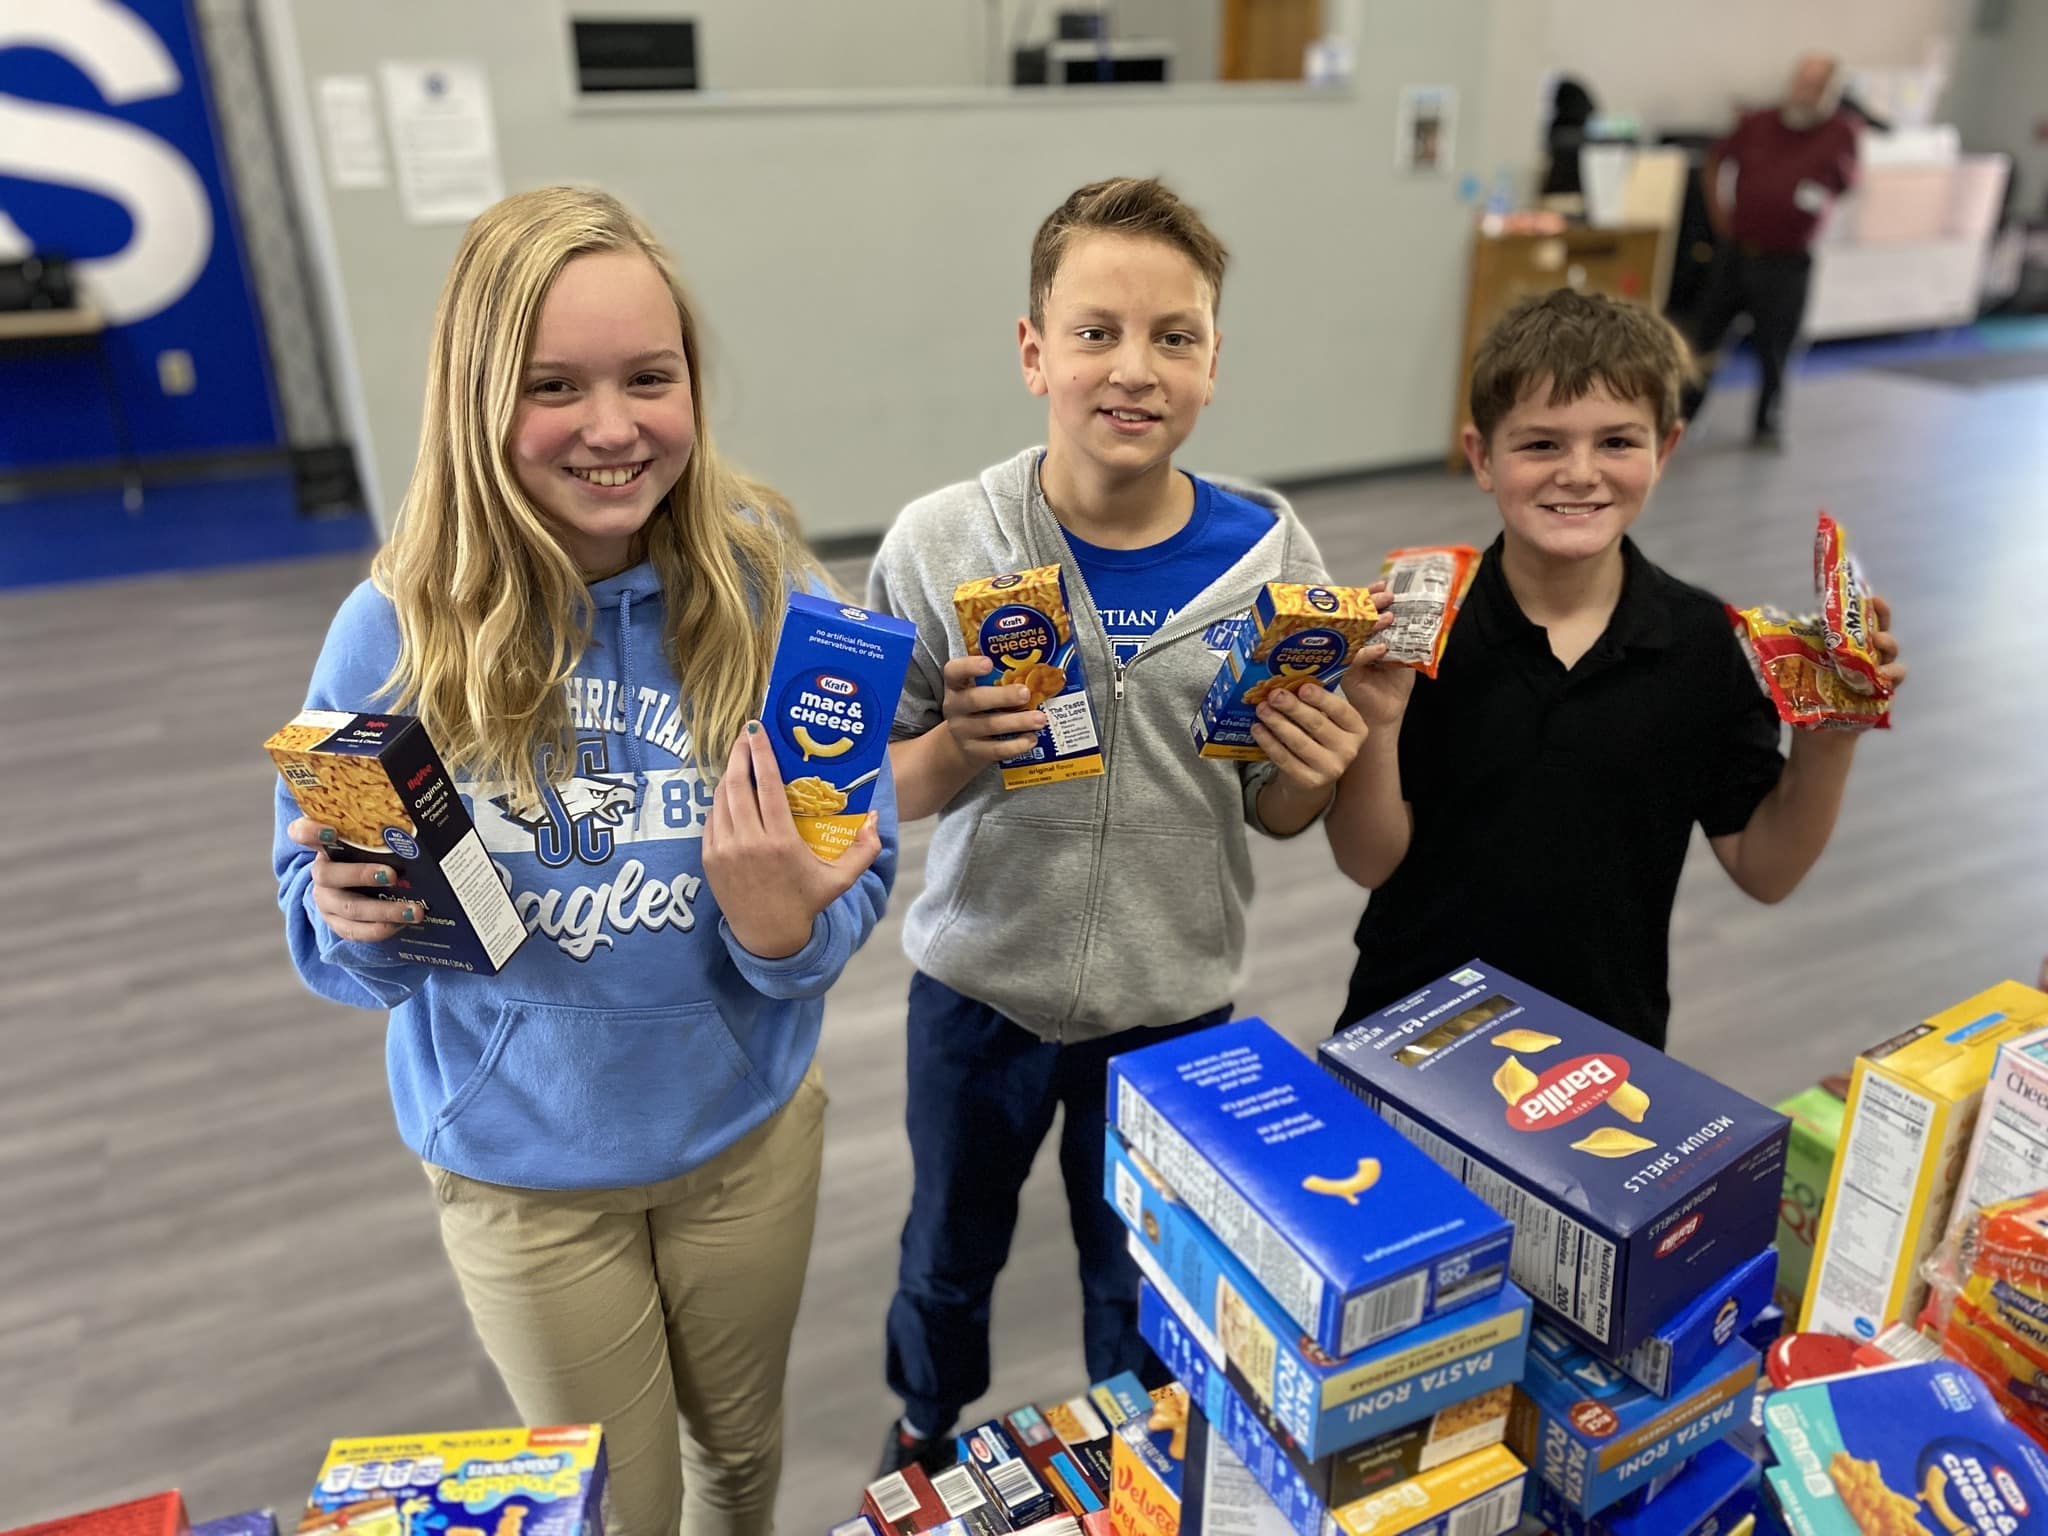 SCA sixth grade students (l-r) Olivia Mick, Luke Montgomery, and Nicholas Breshears organize and pack some of the over 1,600 units of boxed foods donated by SCA students in the 15th annual Elementary Food Drive.